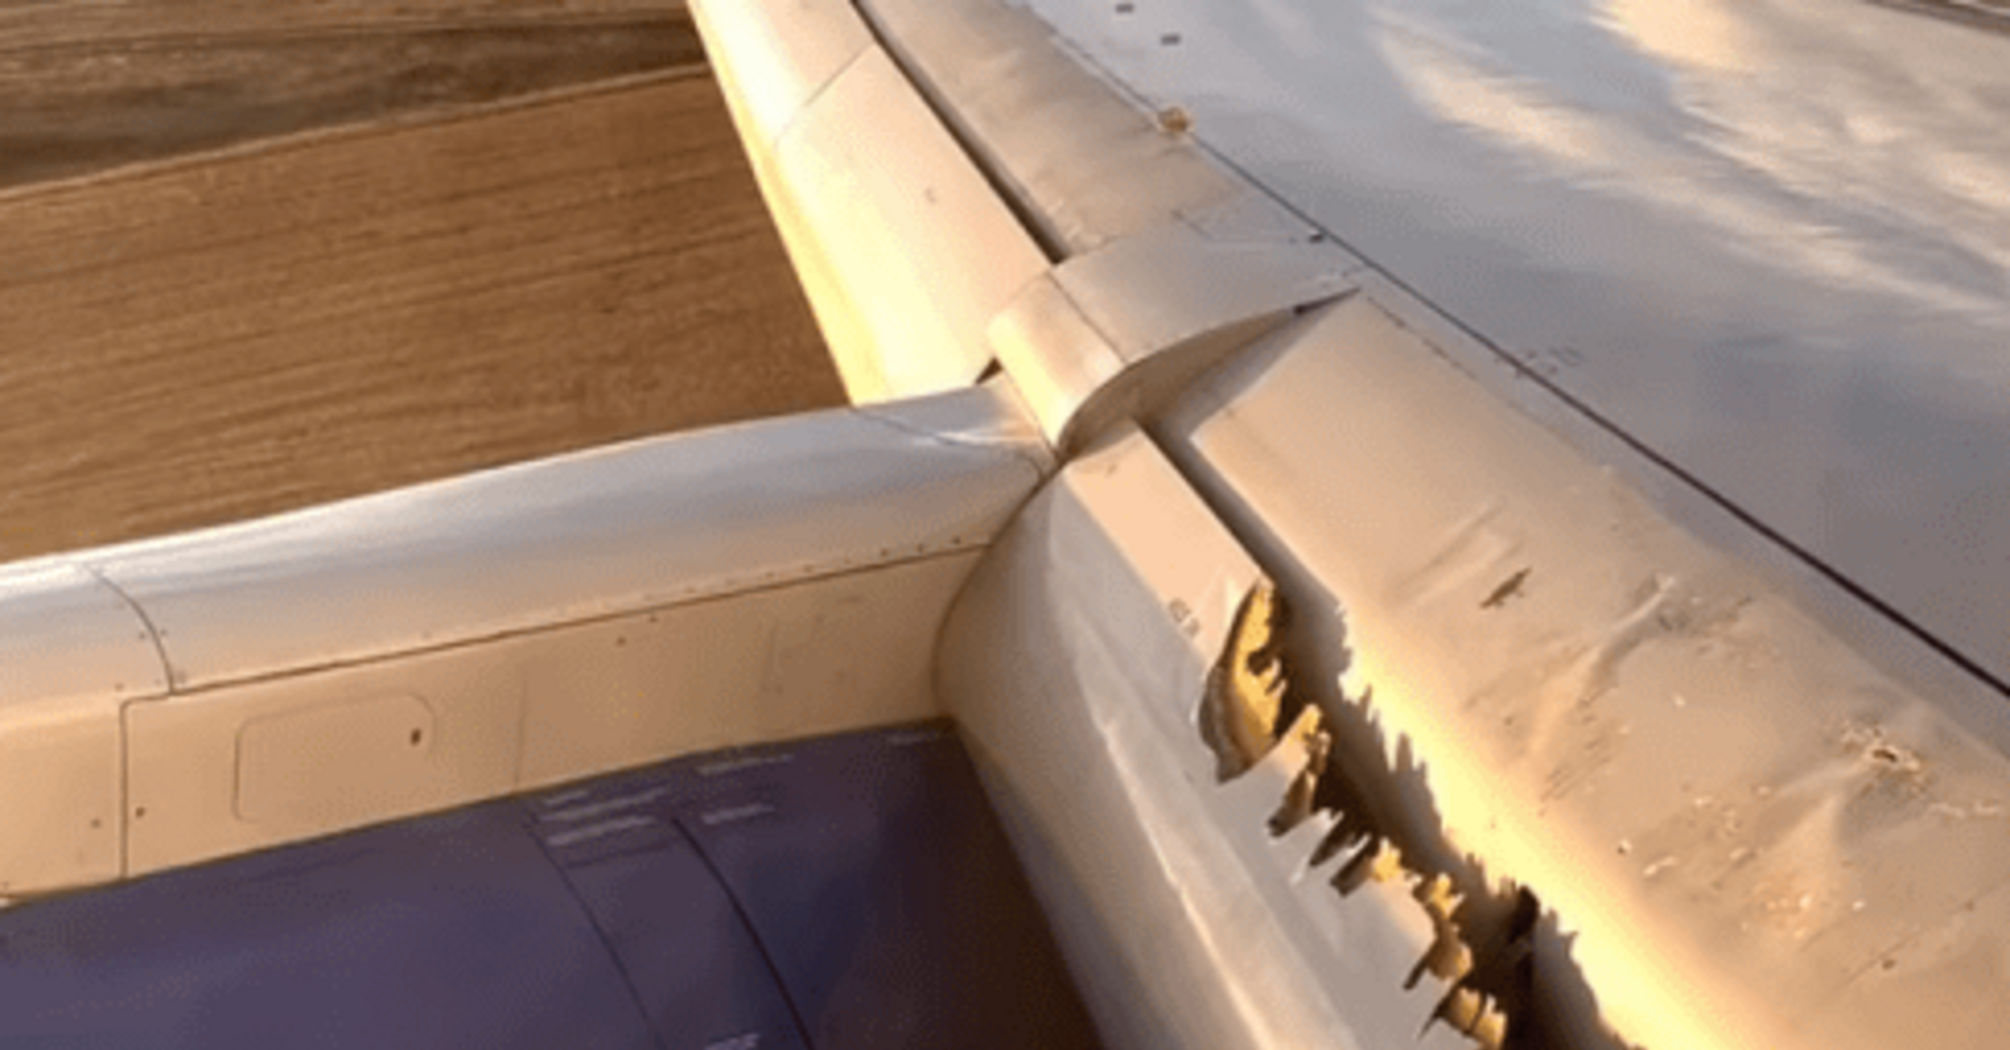 In the United States, a wing of an airplane began to fall apart during a flight